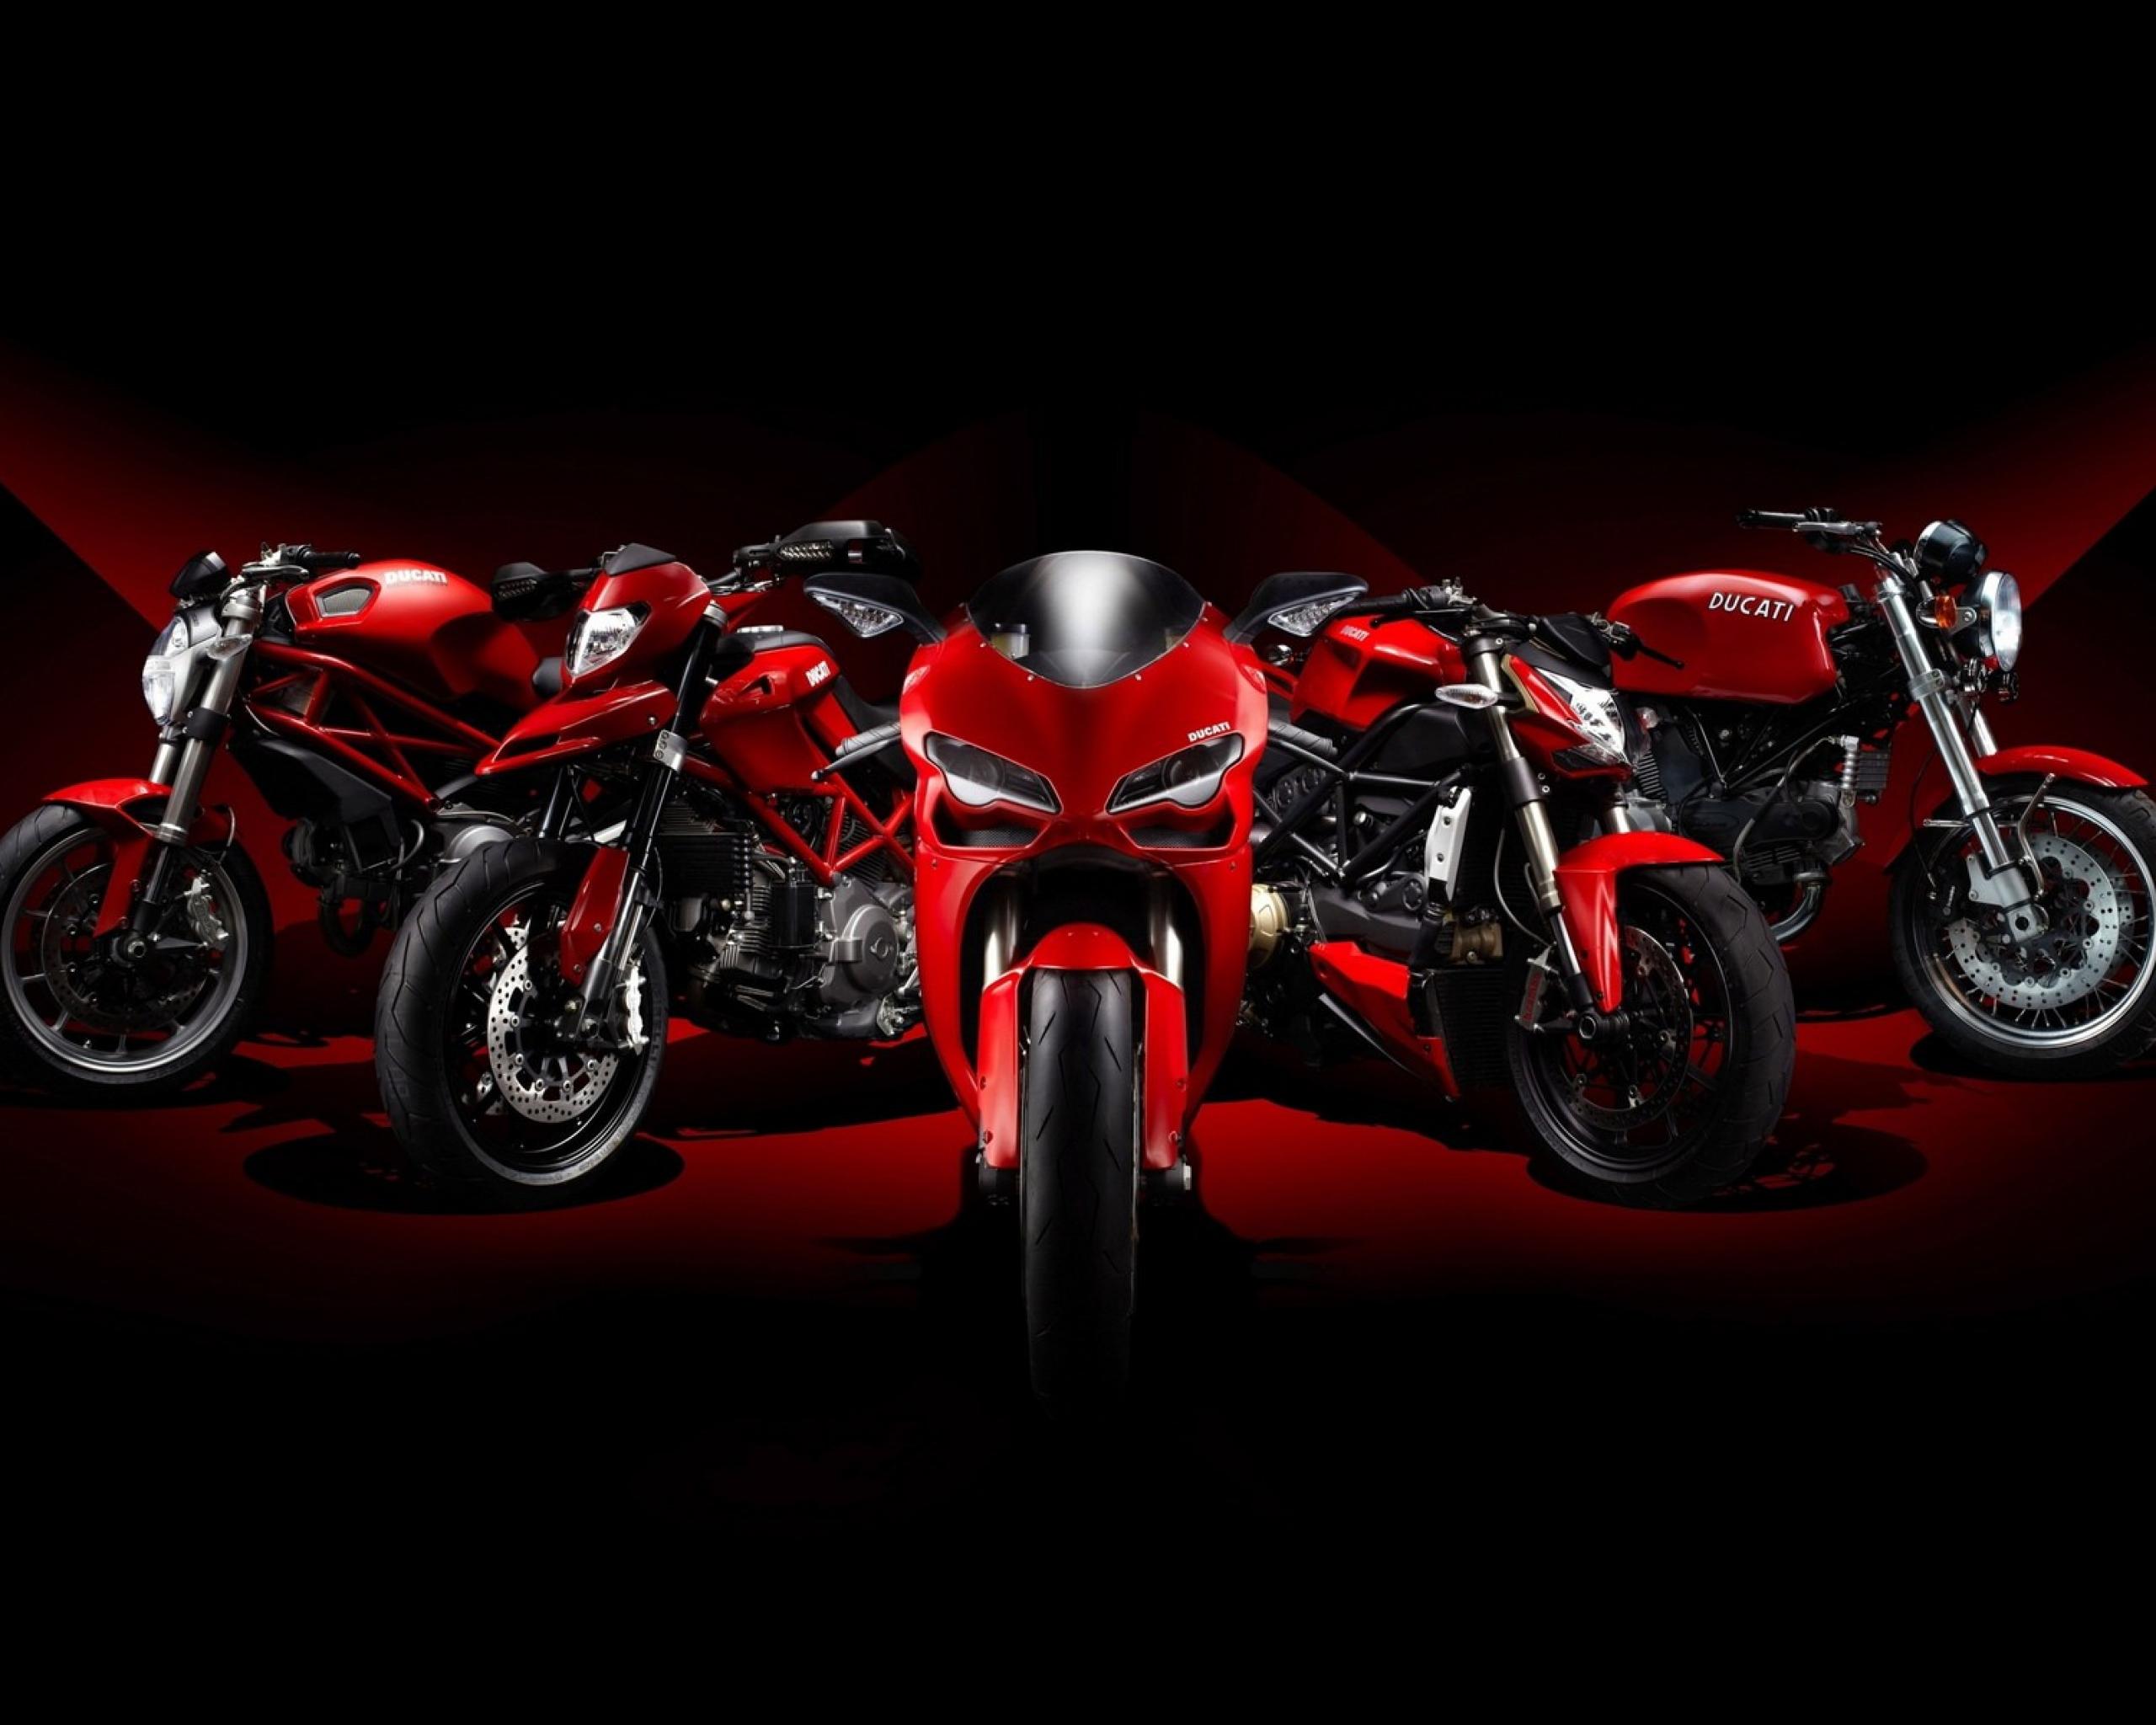 Hd wallpapers motorcycle